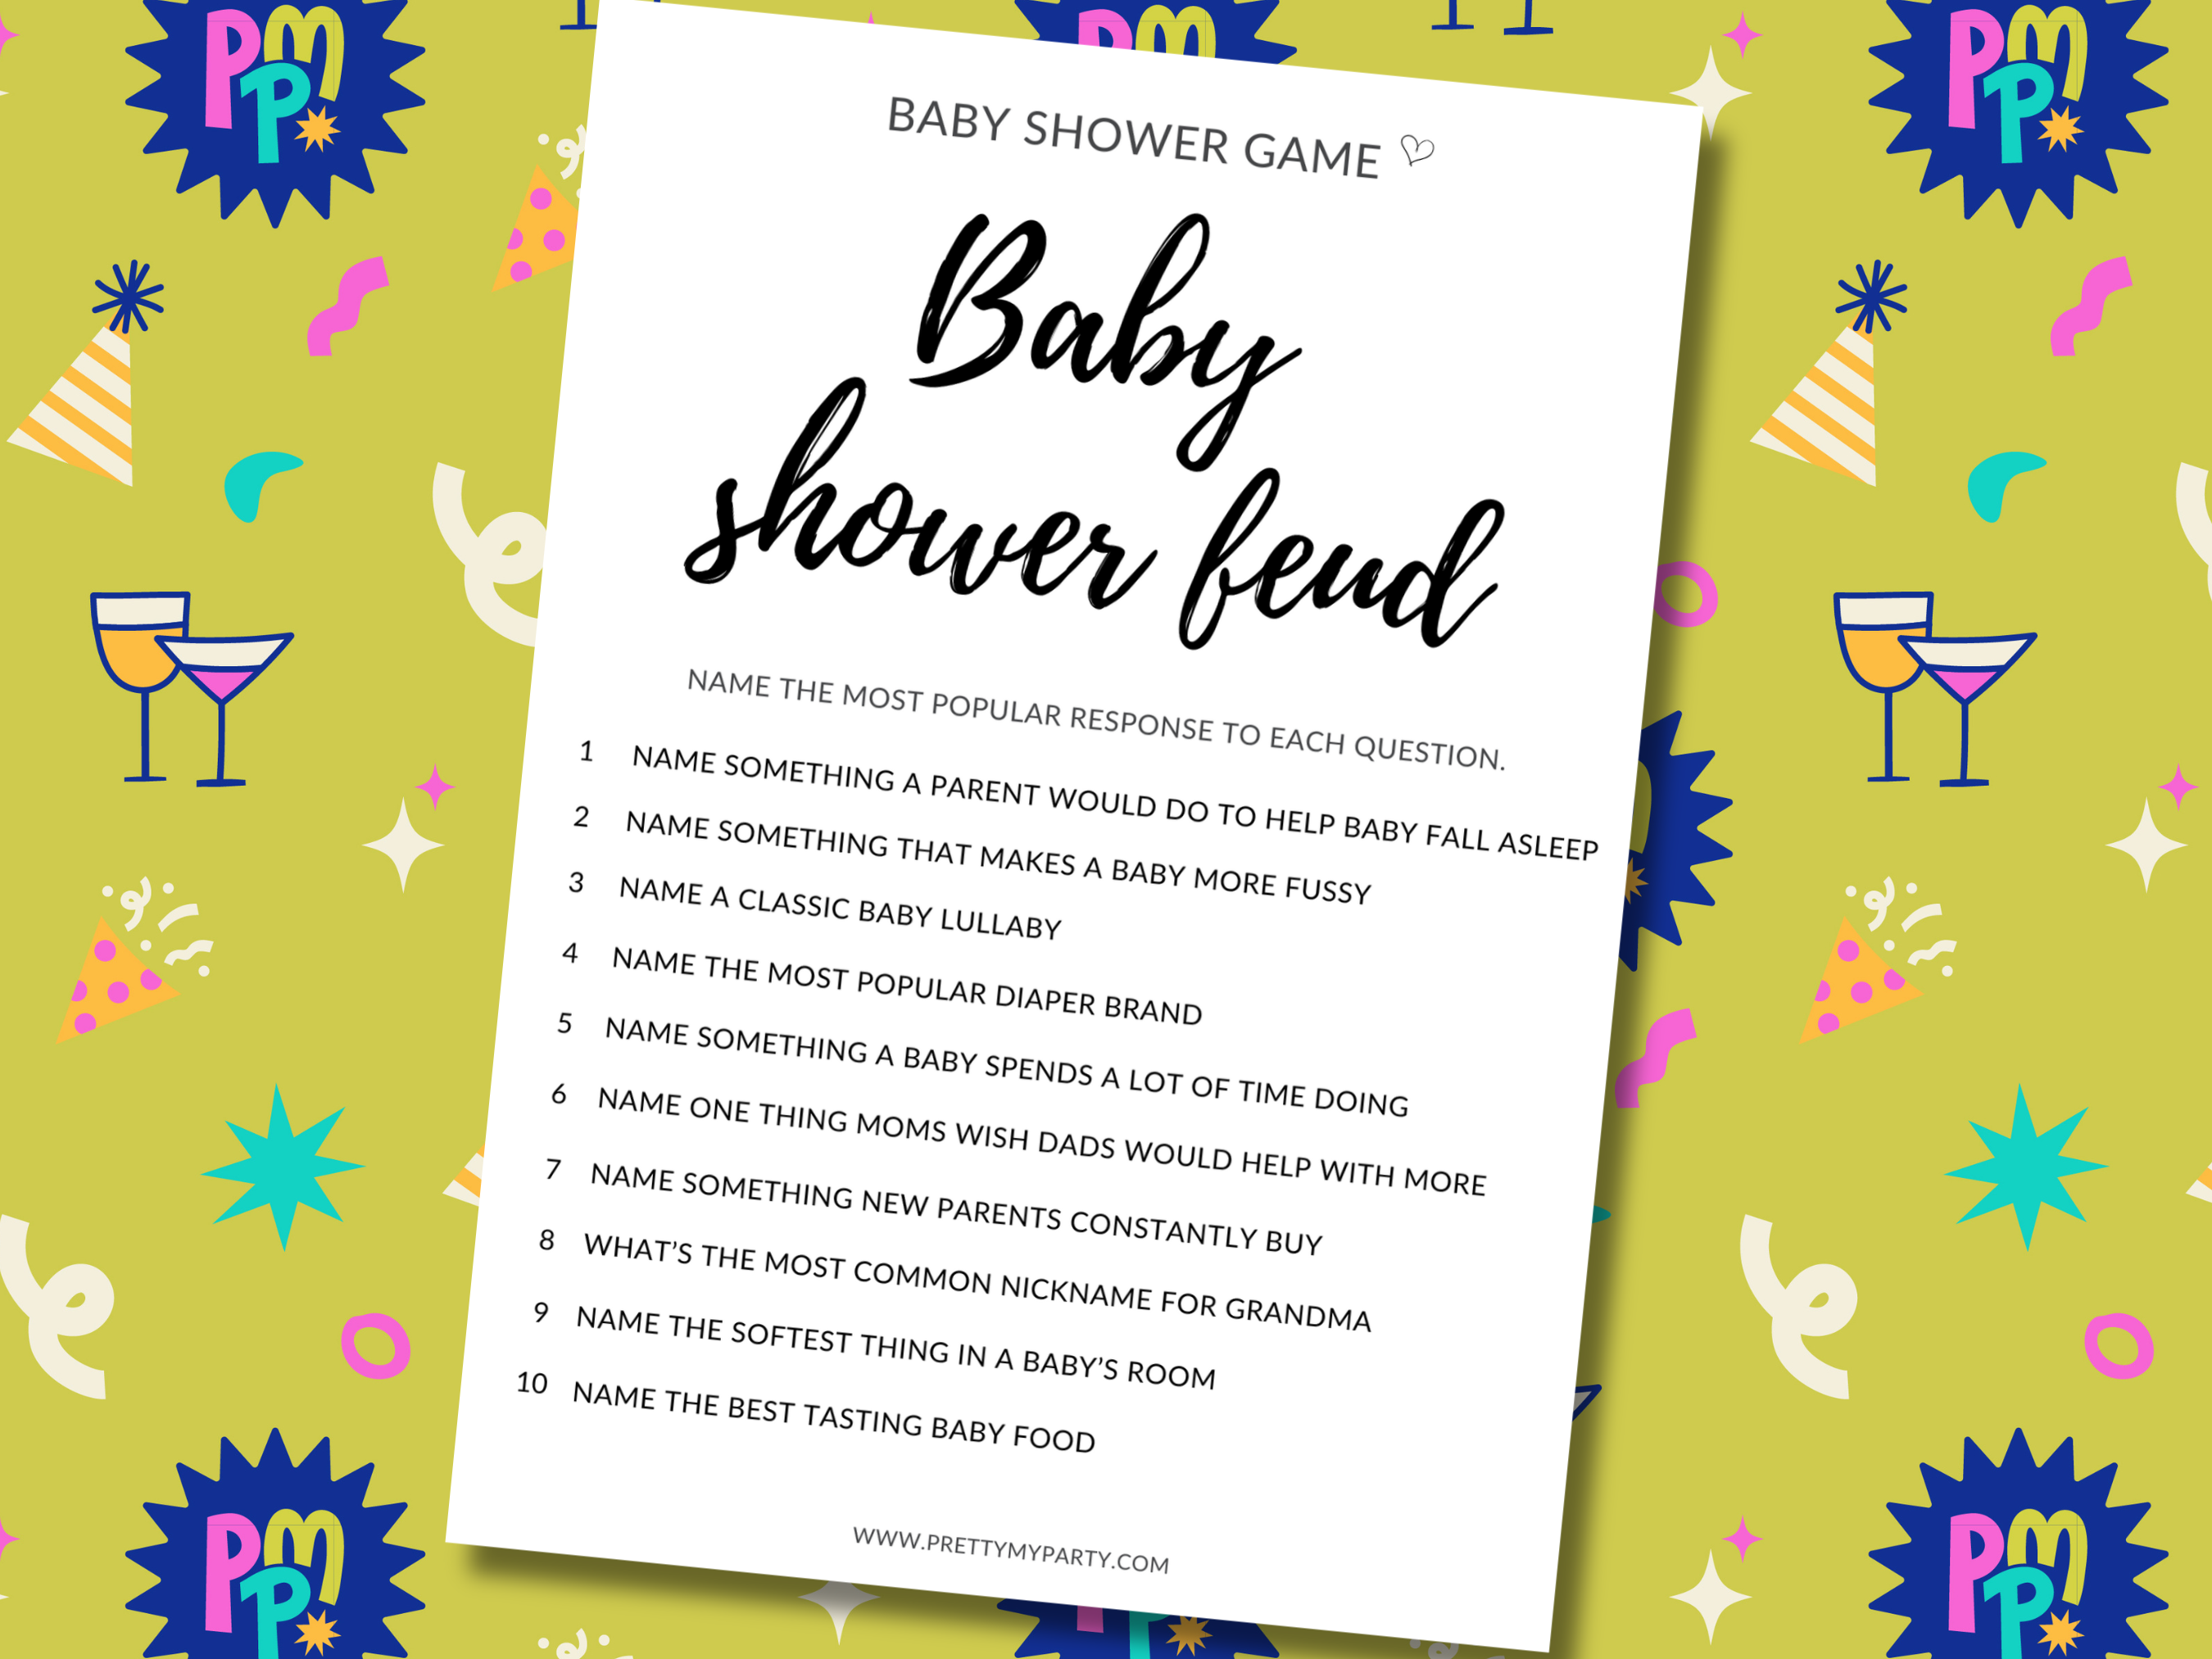 Baby Shower Feud Free Printable Baby Shower Game on Pretty My Party